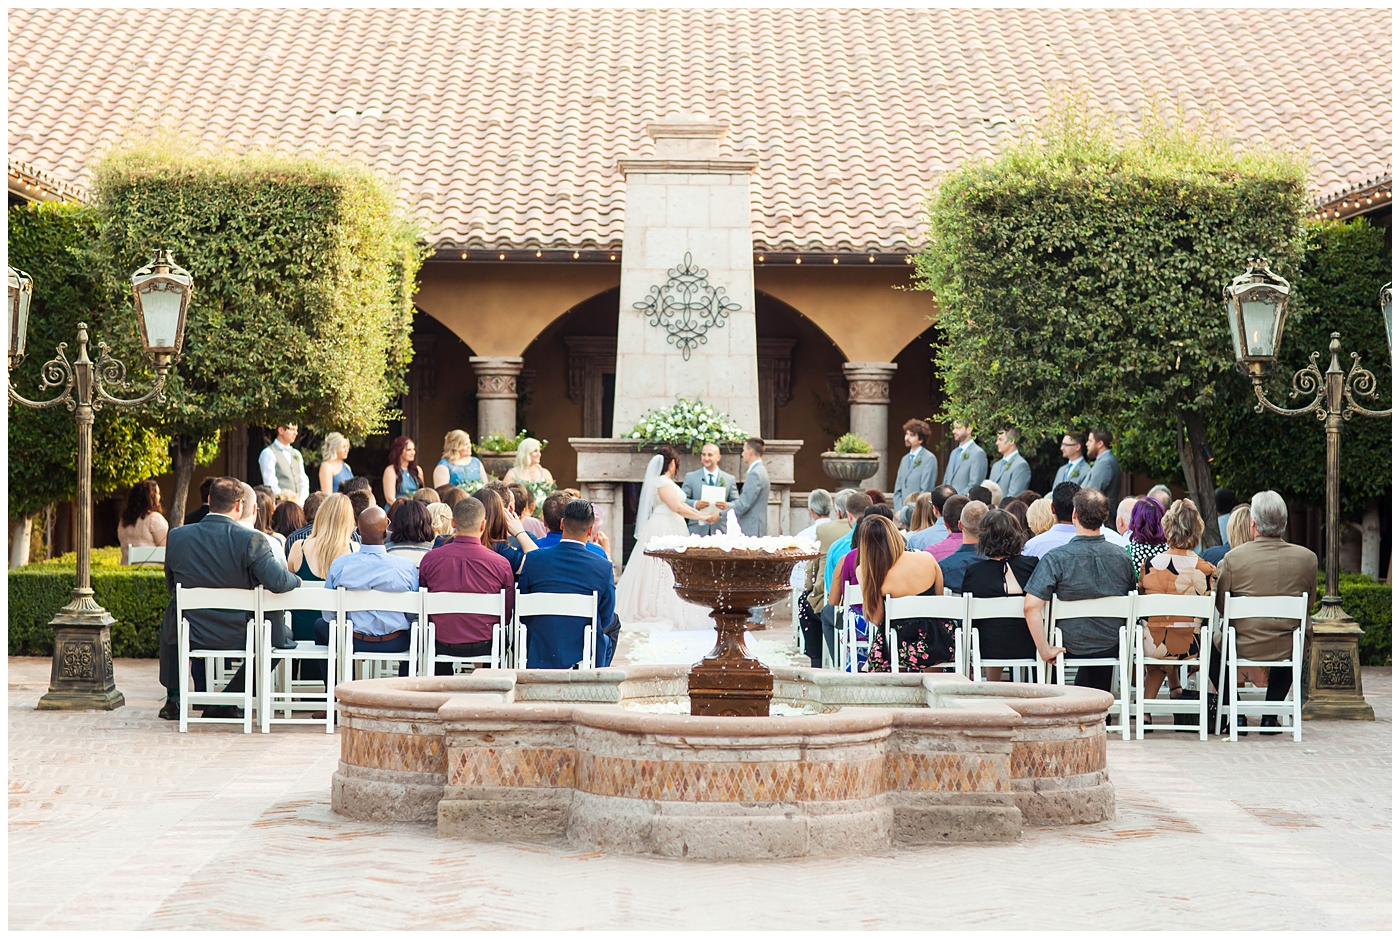 Bride and Groom holding hands during ceremony in Tuscan Courtyard